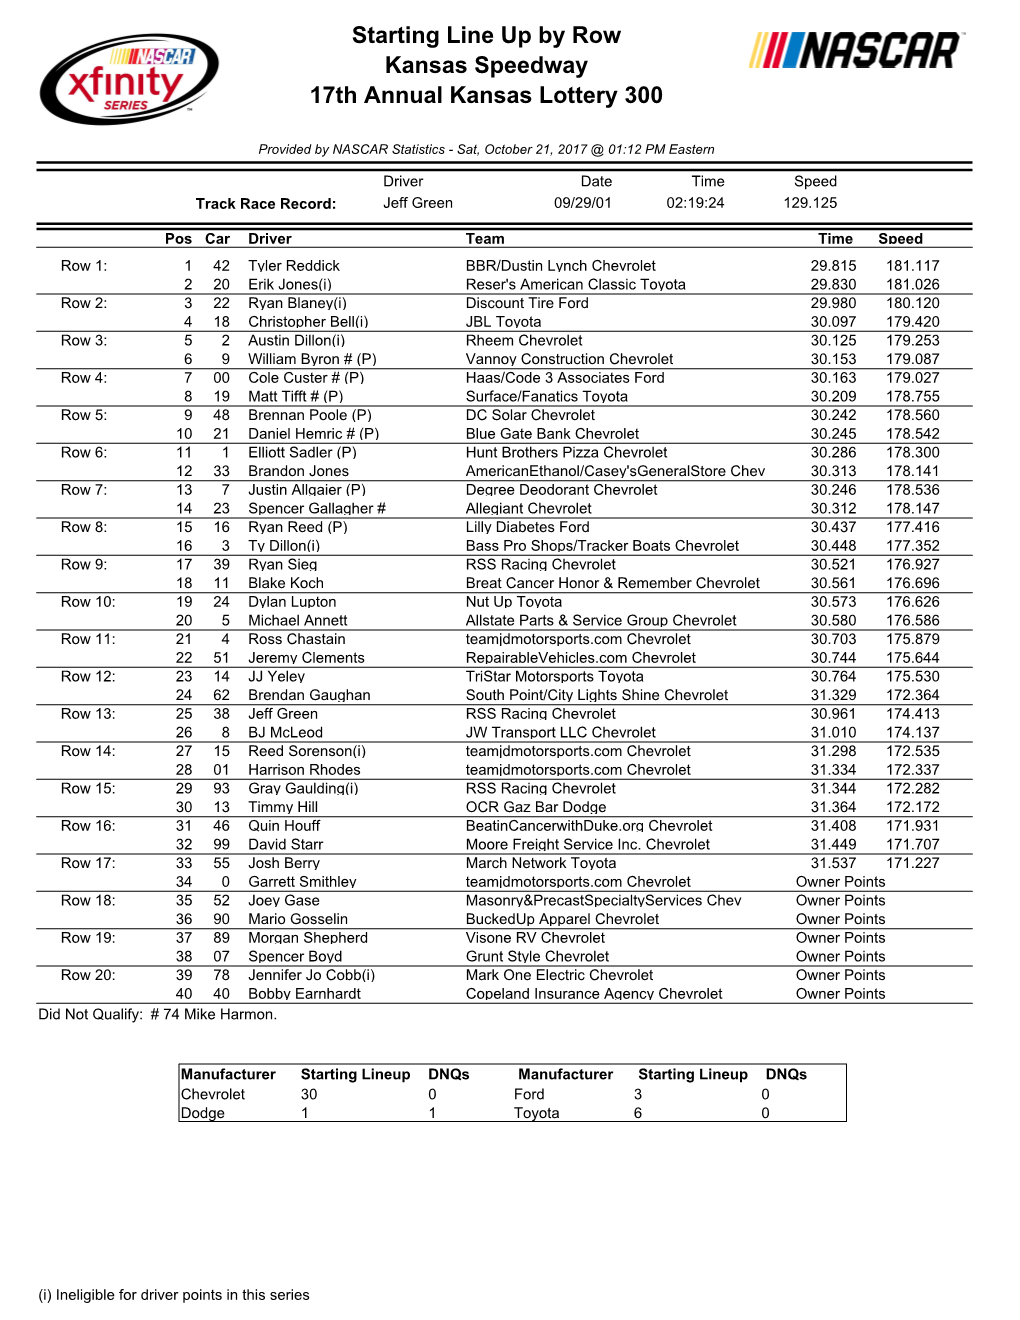 Starting Line up by Row Kansas Speedway 17Th Annual Kansas Lottery 300